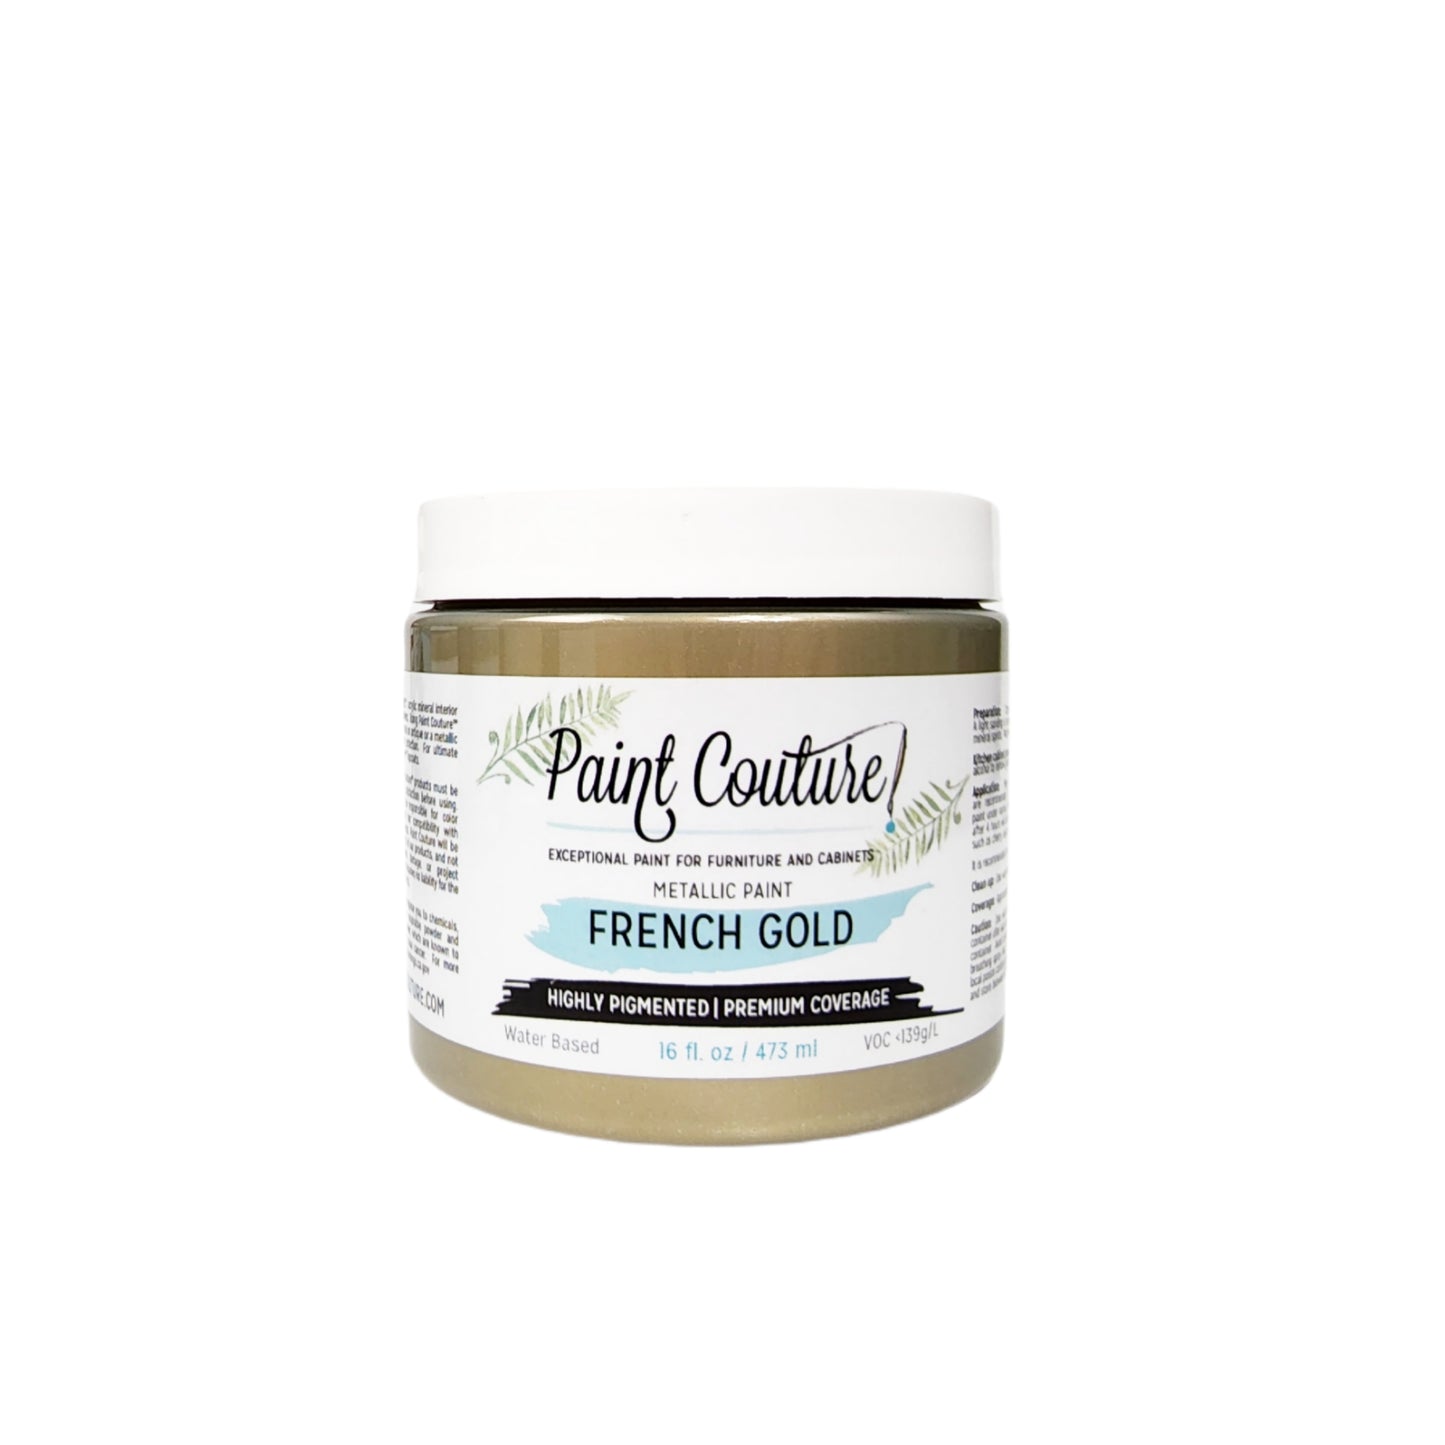 Paint Couture Metallic Paint French Gold